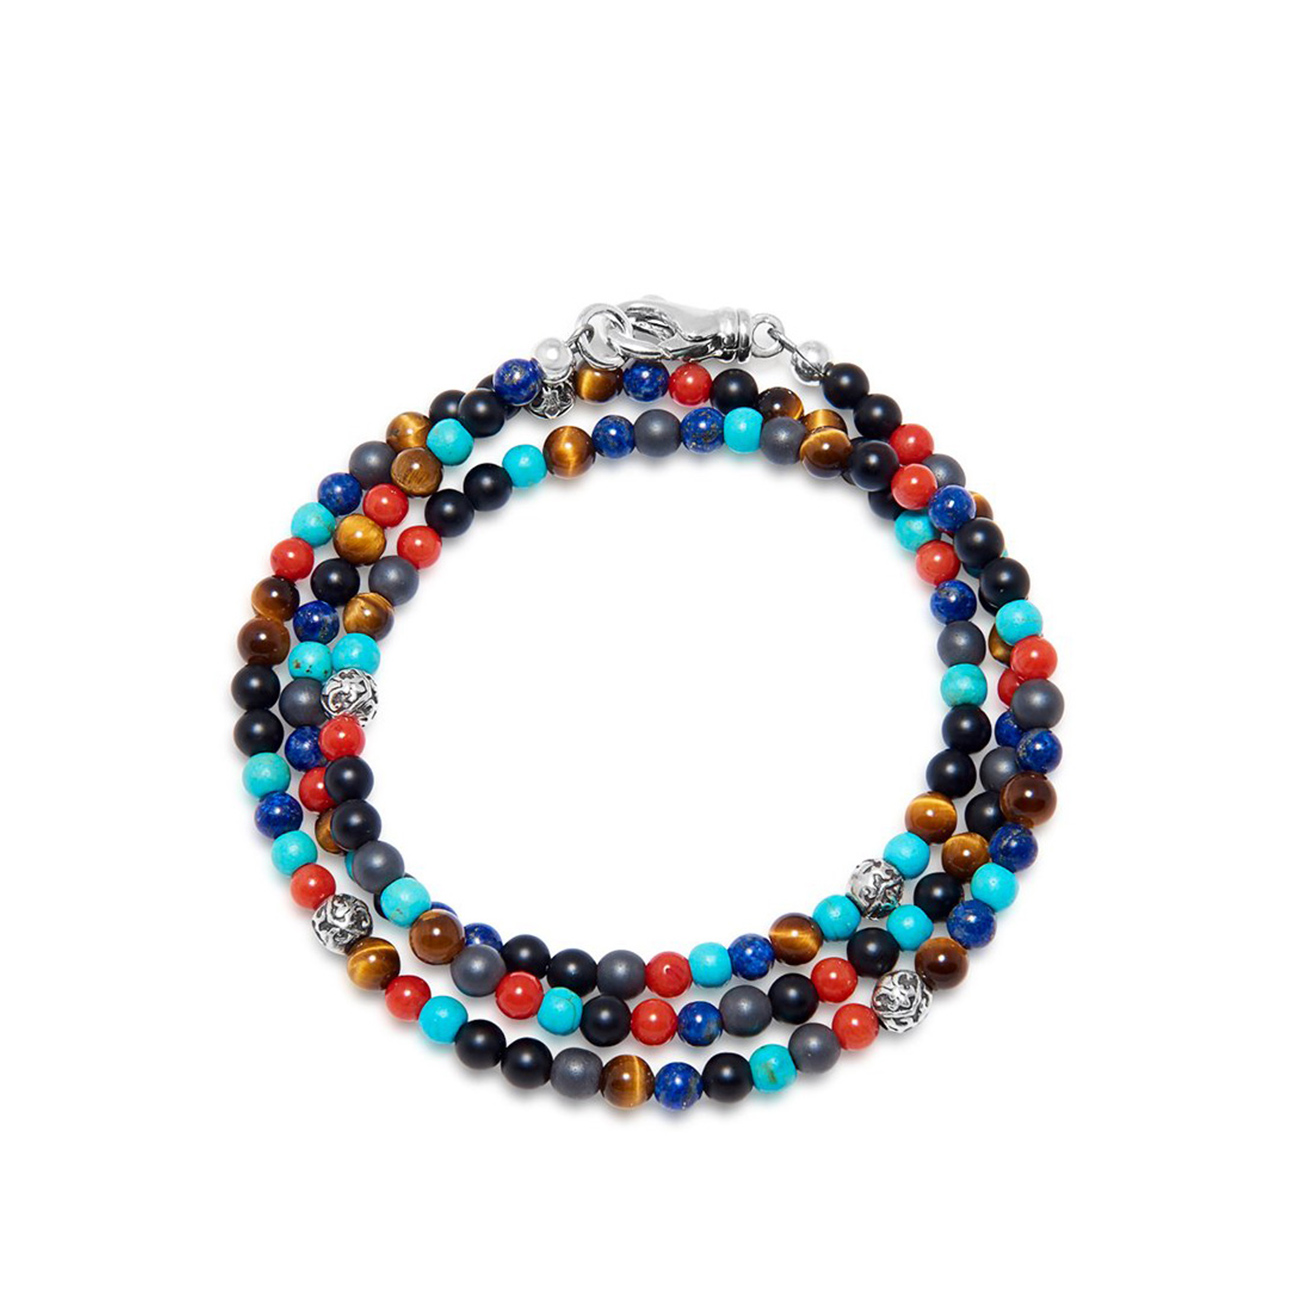 Nialaya The Mykonos Collection - Turquoise, Red Glass Beads, Blue Lapis, Hematite and Onyx